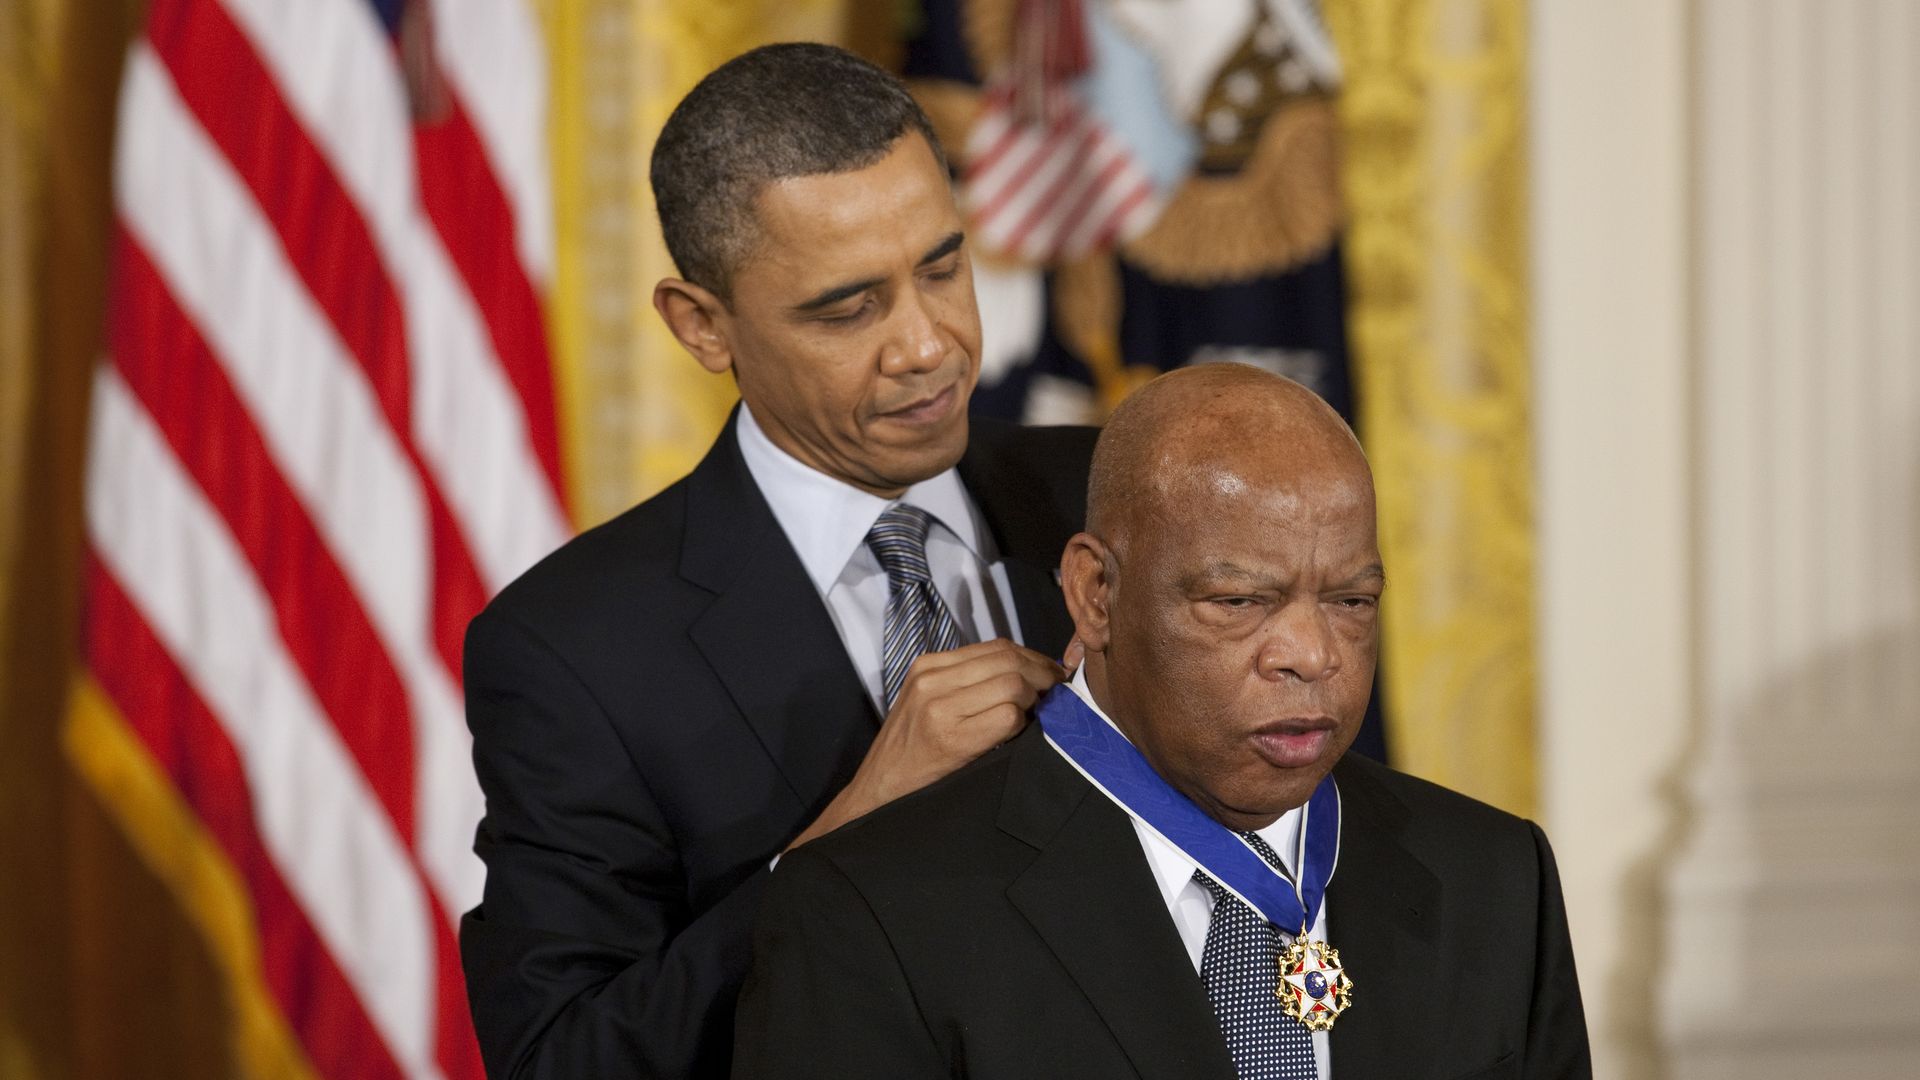 Then-President Barack Obama awards the Medal of Freedom to Rep. John Lewis at the White House in Washington, D.C., in 2011. Photo: Brooks Kraft LLC/Corbis via Getty Images